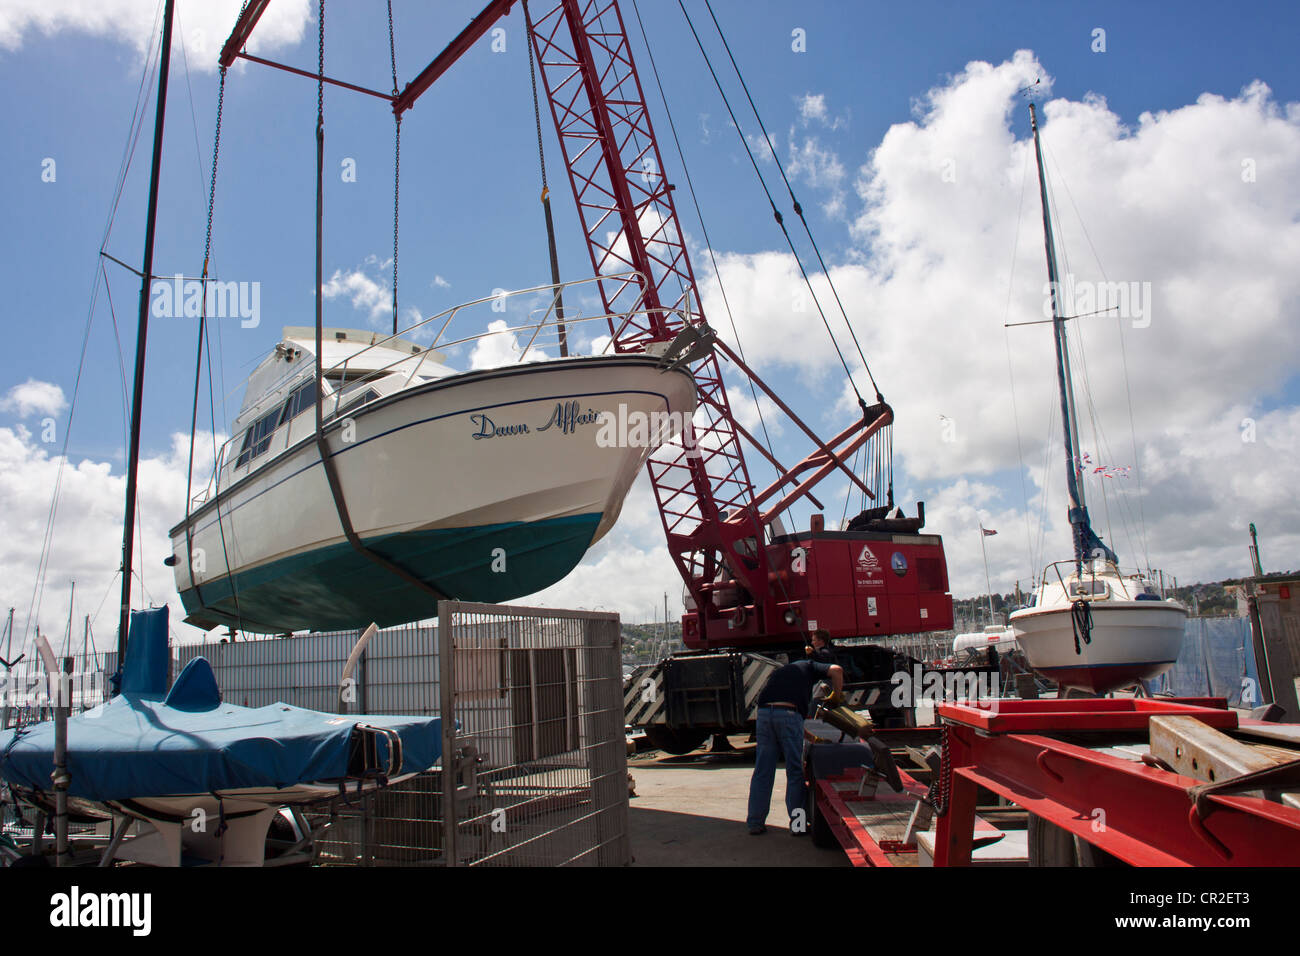 Motor yacht (Dawn Affair) being offloaded from lorry in the marine at Torquay, Devon,UK. Stock Photo